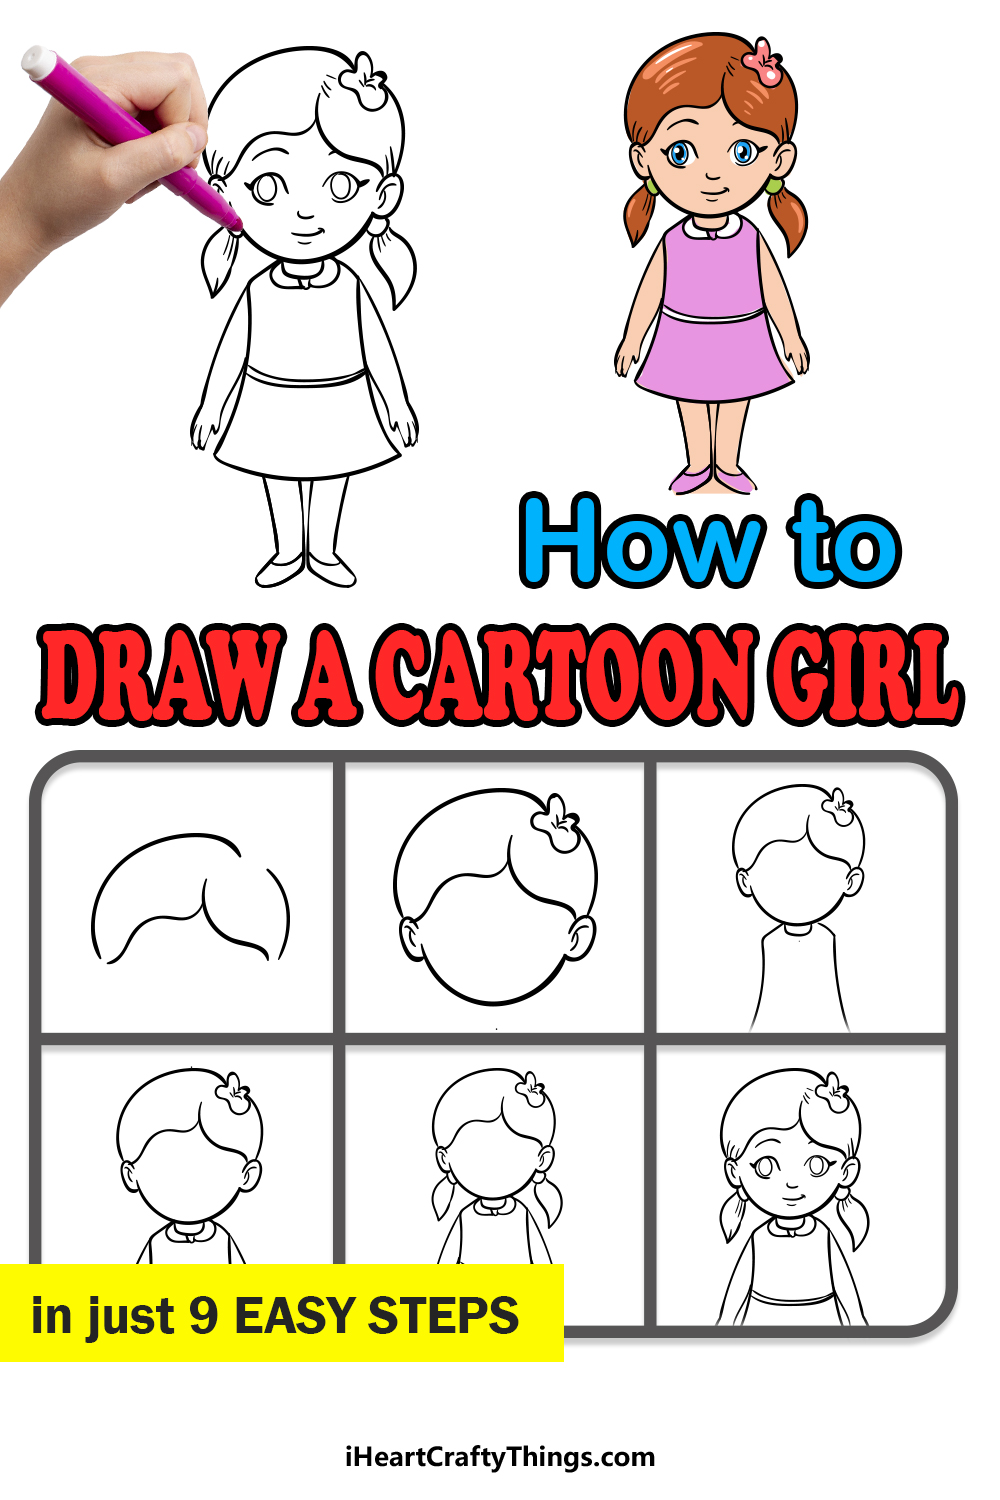 how to draw a cartoon girl in 9 easy steps